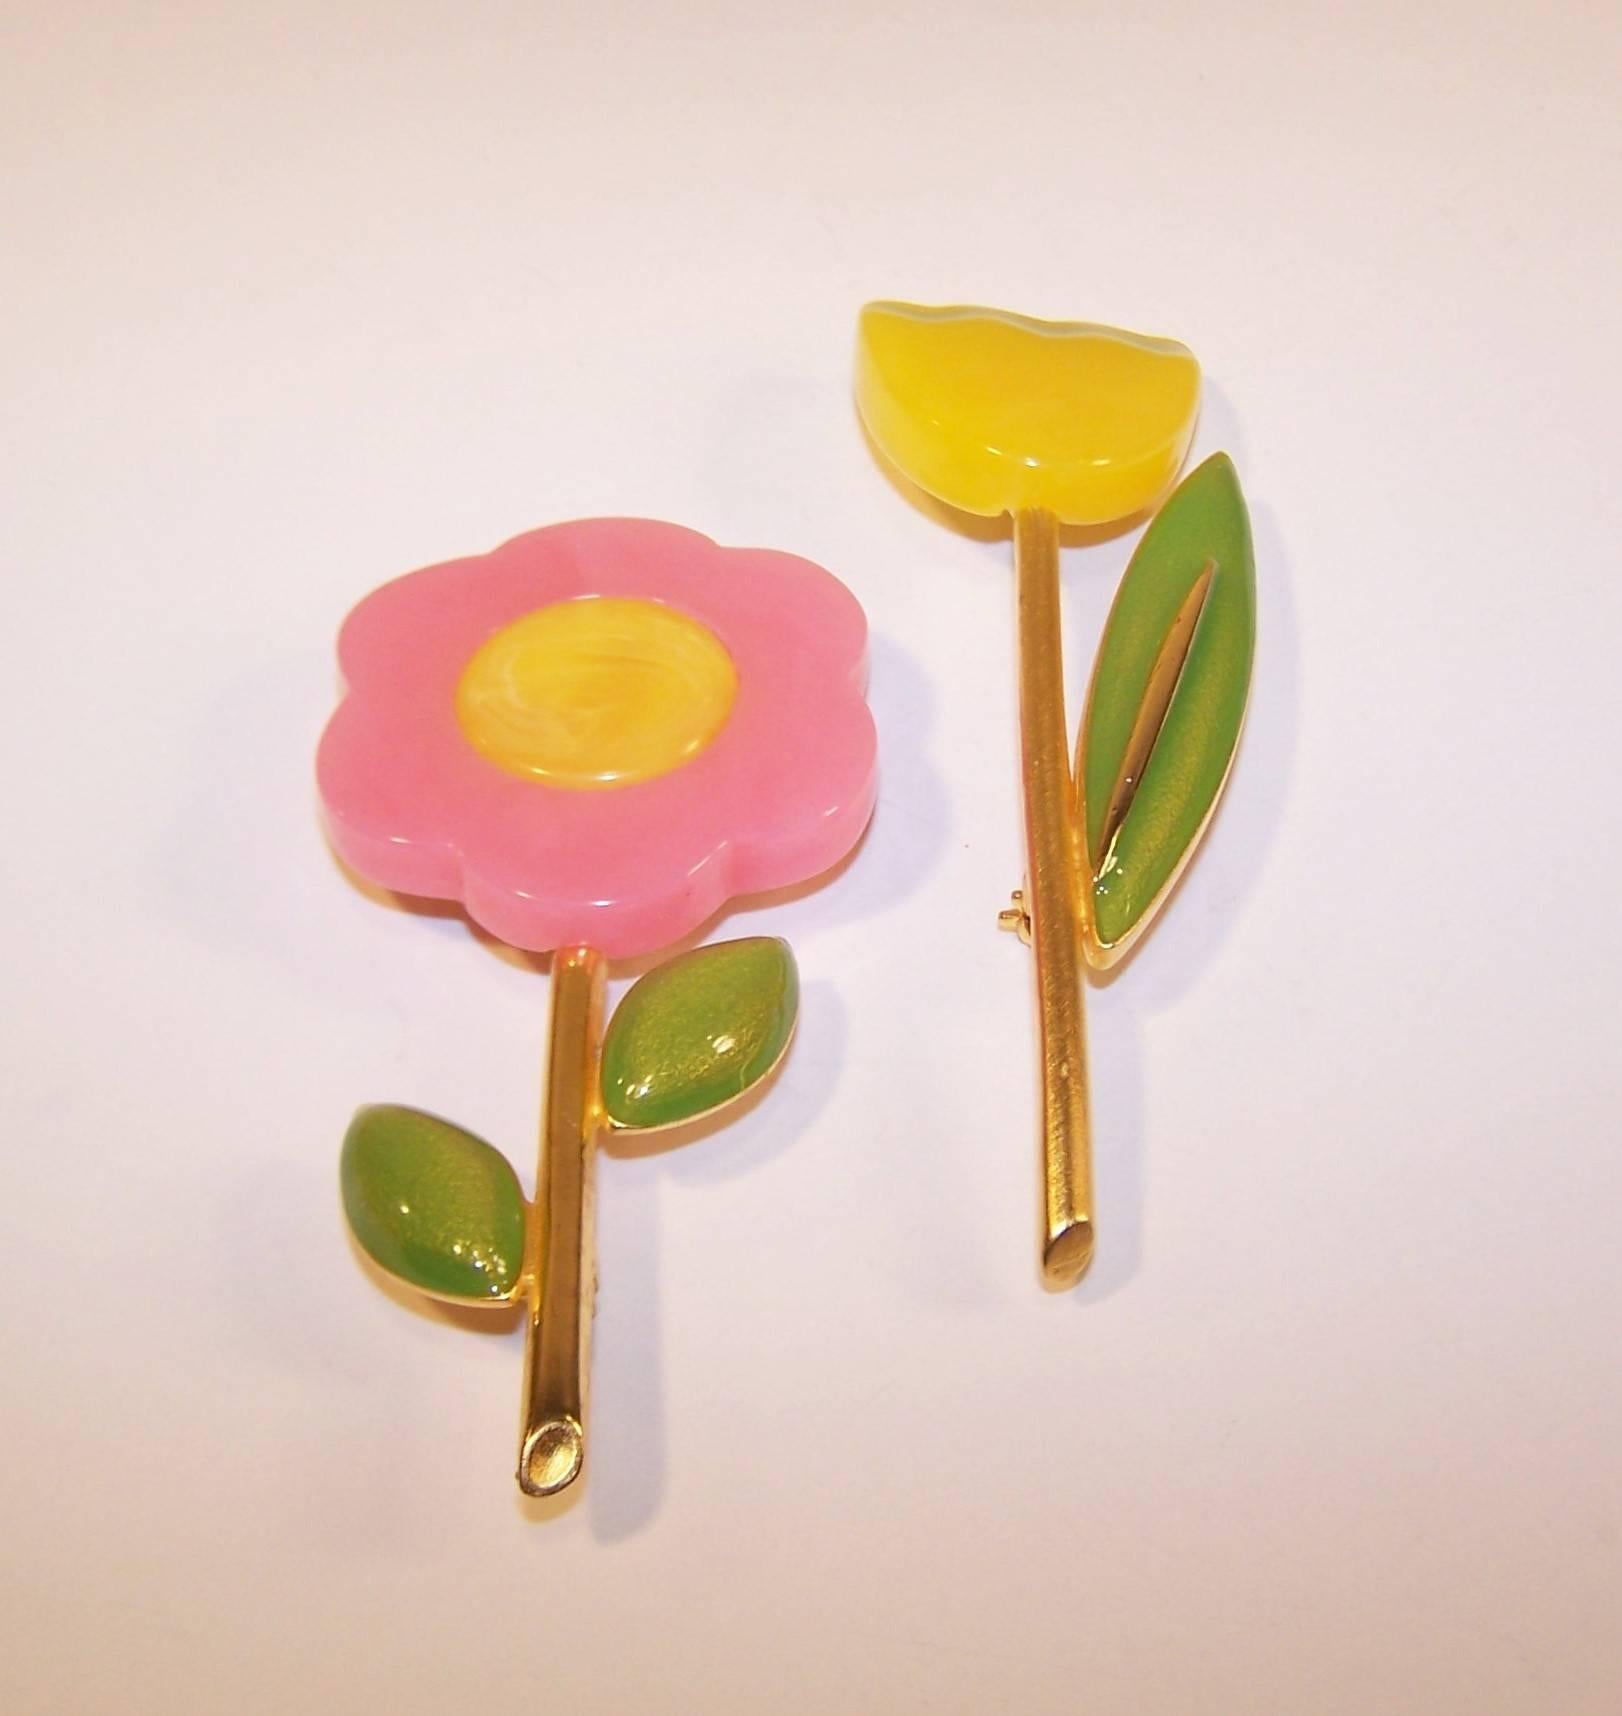 Much like his lovely clothing designs, Hubert de Givenchy created elegant and feminine costume jewelry starting in the 1950's and throughout his career.  This pair of flower brooches are made from pastel resin in yellow, pink and green with